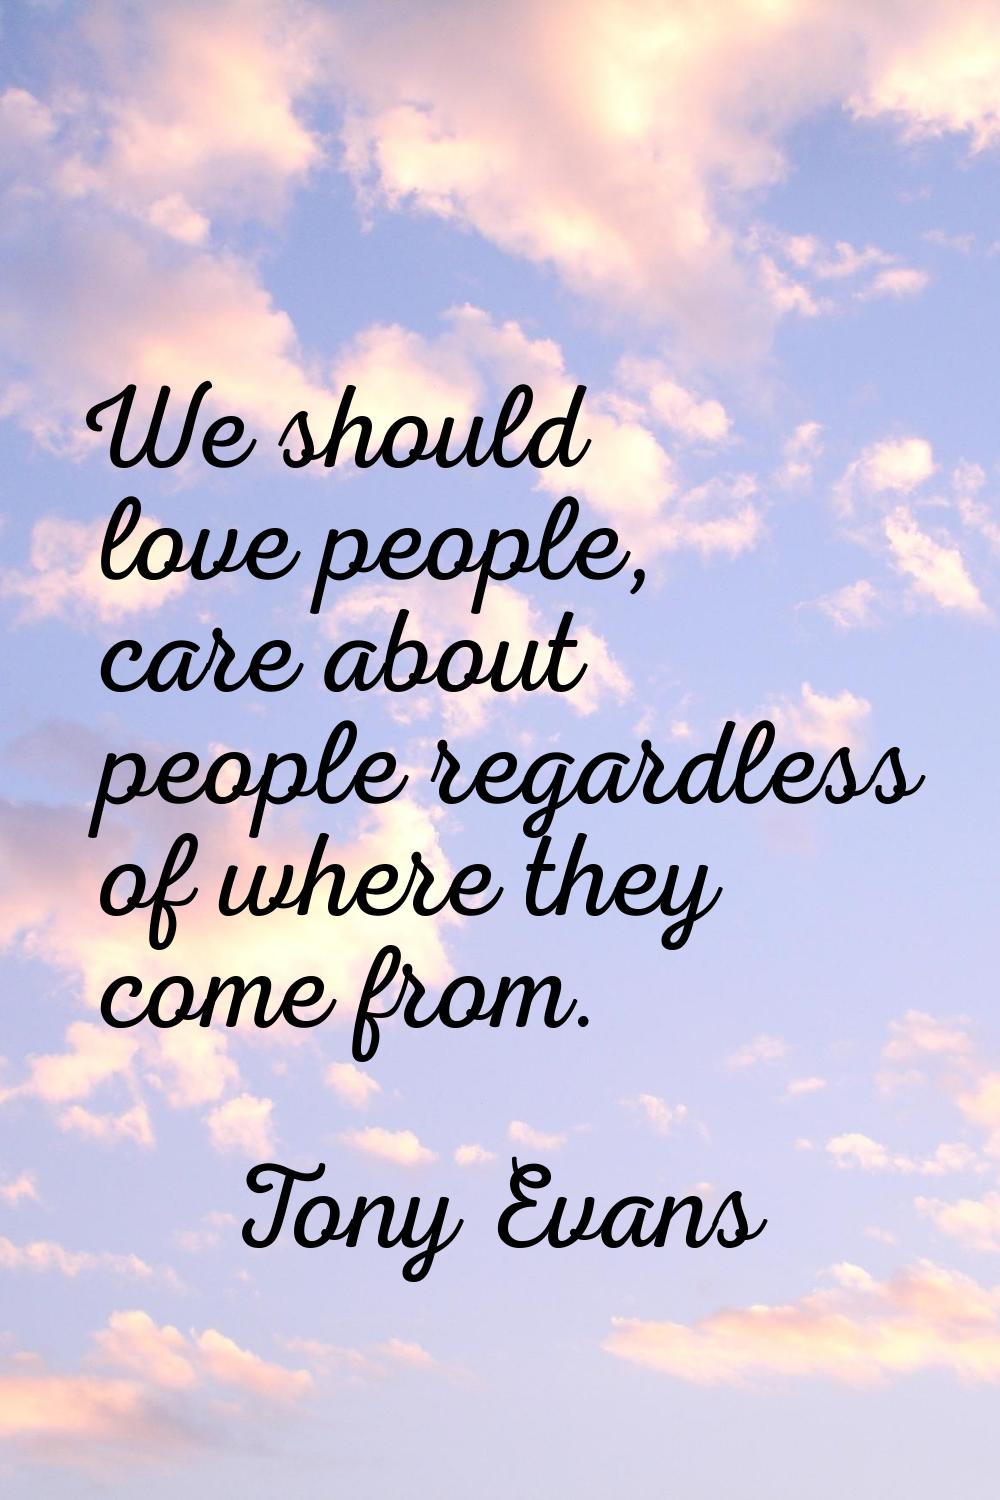 We should love people, care about people regardless of where they come from.